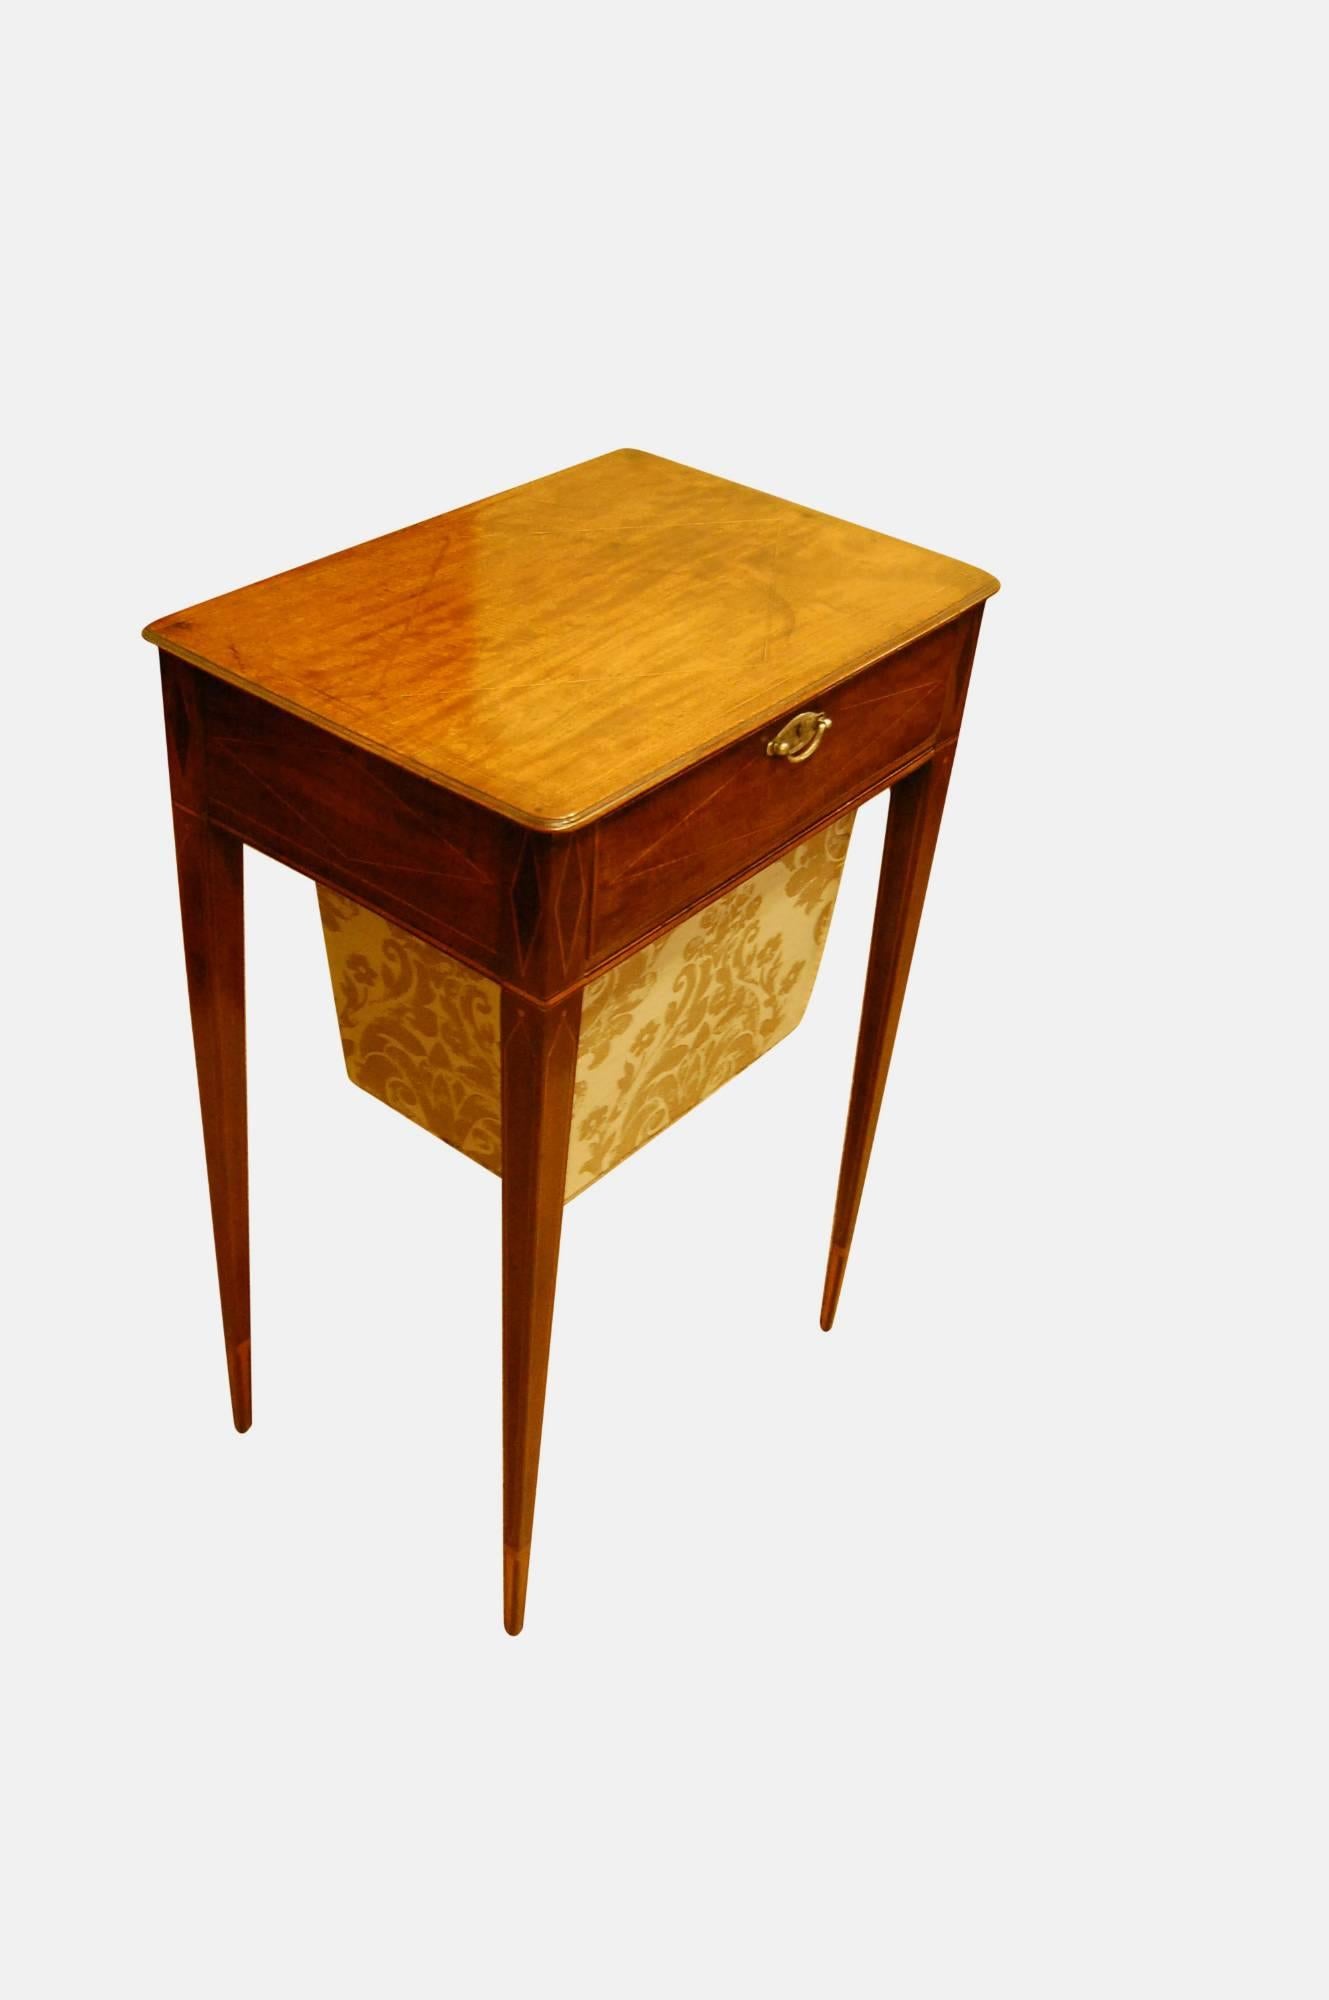 George III inlaid mahogany work table

Silk lined drawer with the original handle of paktong (silver substitute alloy) with work bag below

Exceptionally narrow taper legs with various inlays,

circa 1795.
 